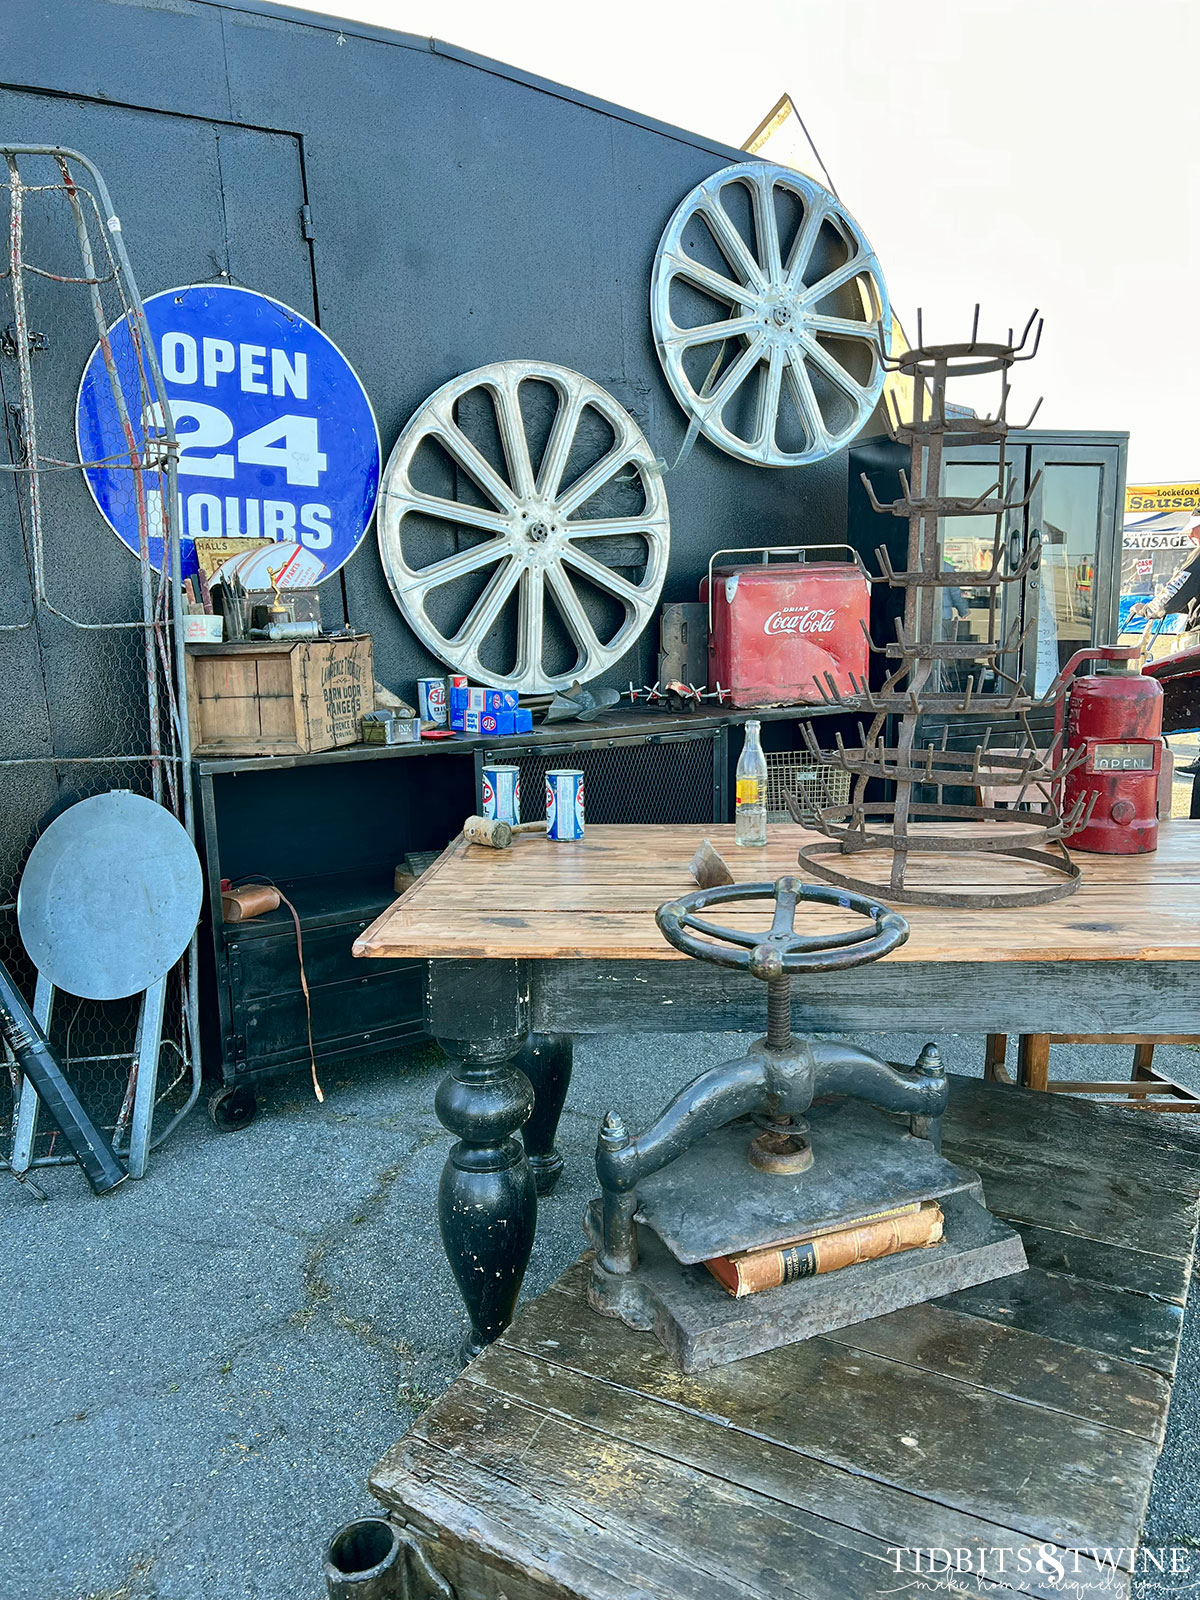 black trailer with film reels on side and black table in front holding bottle drying rack